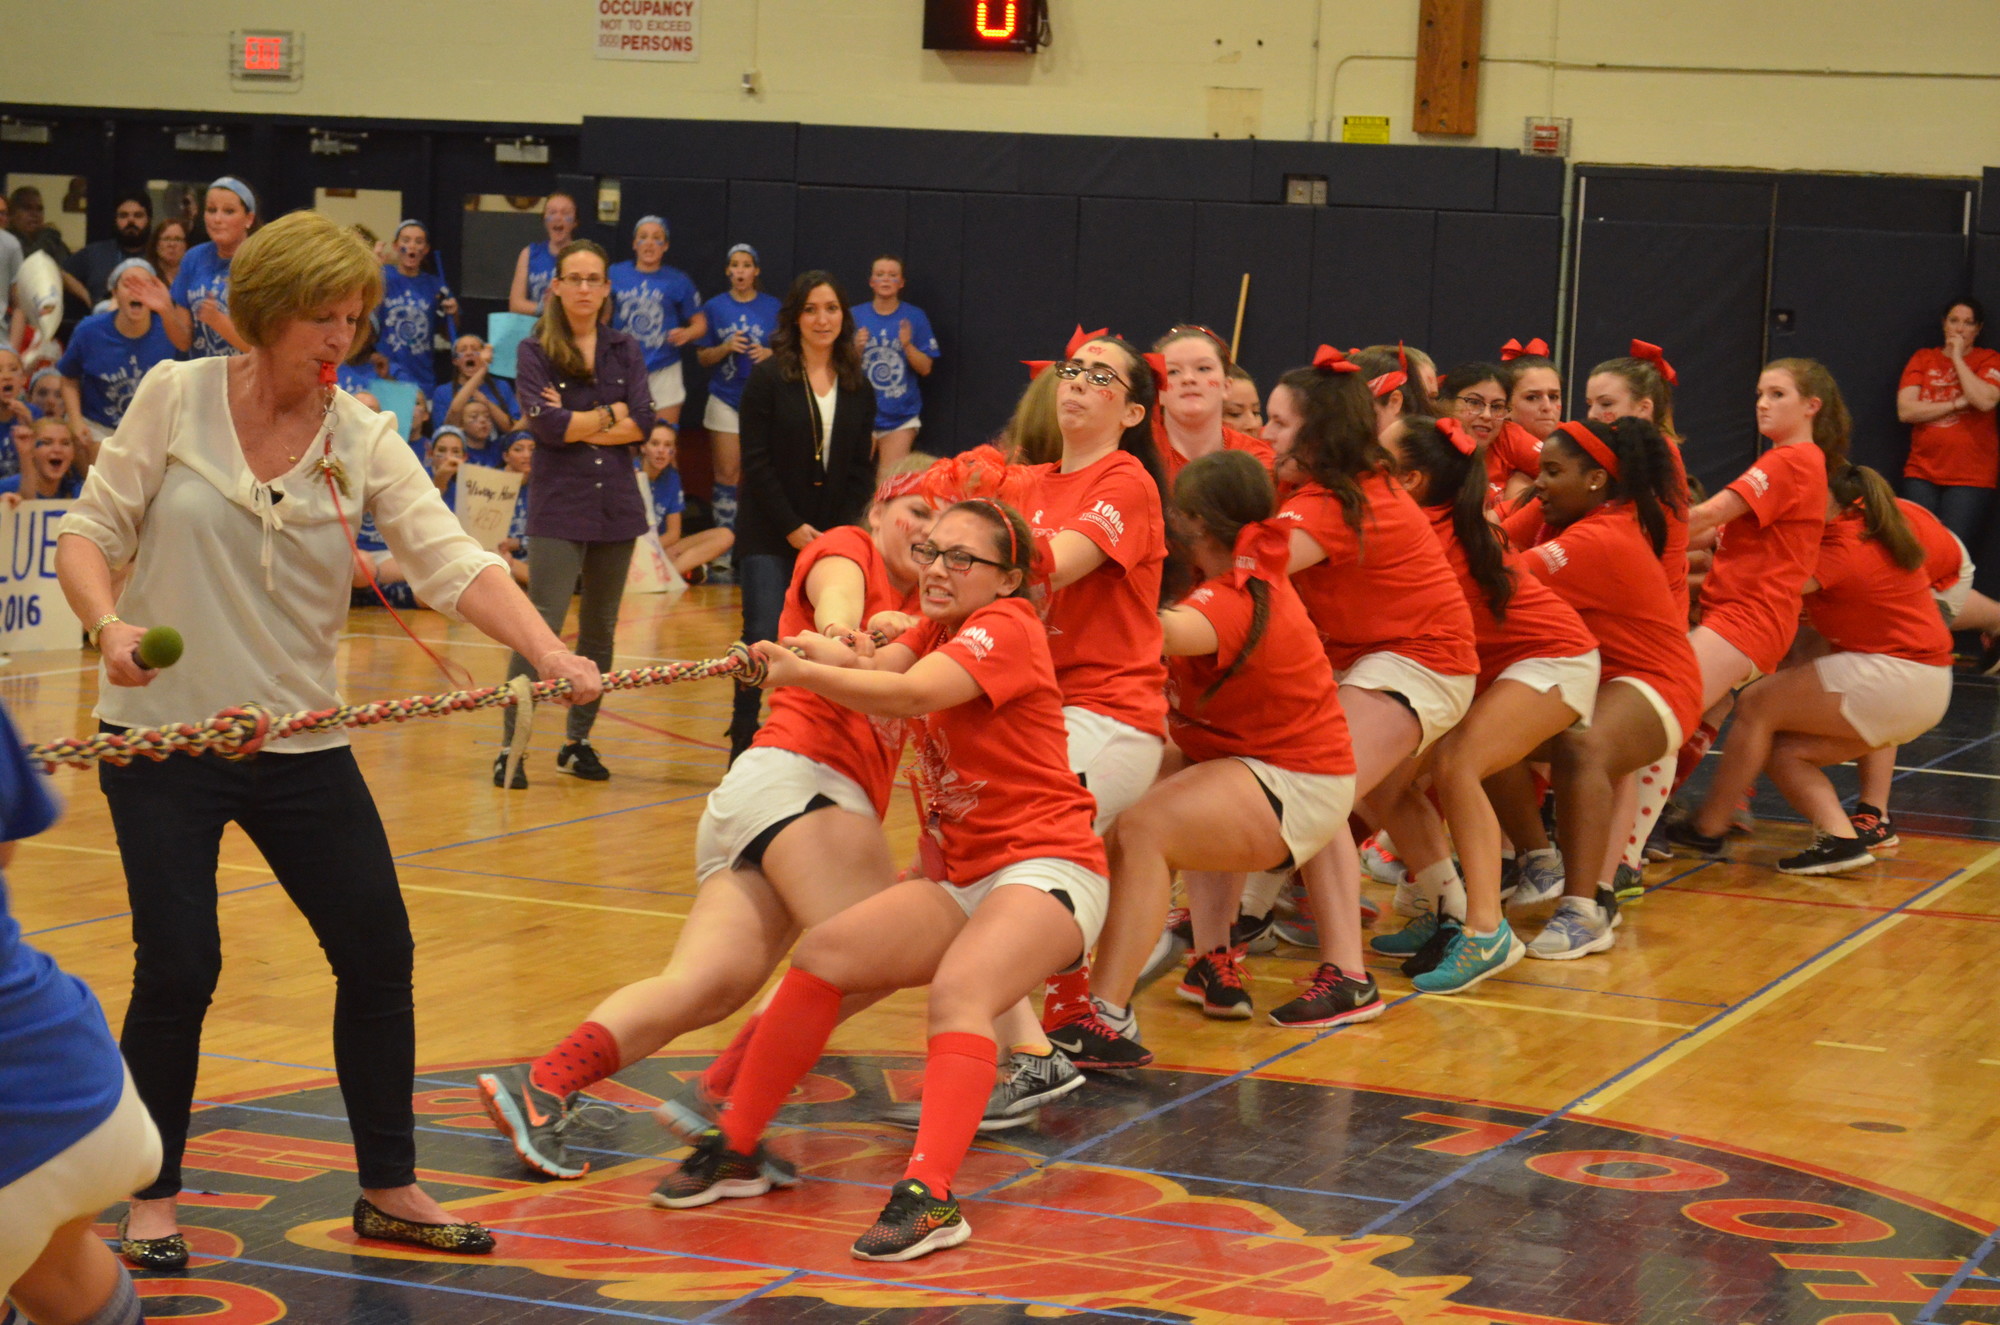 Red’s tug-of-war team put in a valiant effort, but lost to Blue.